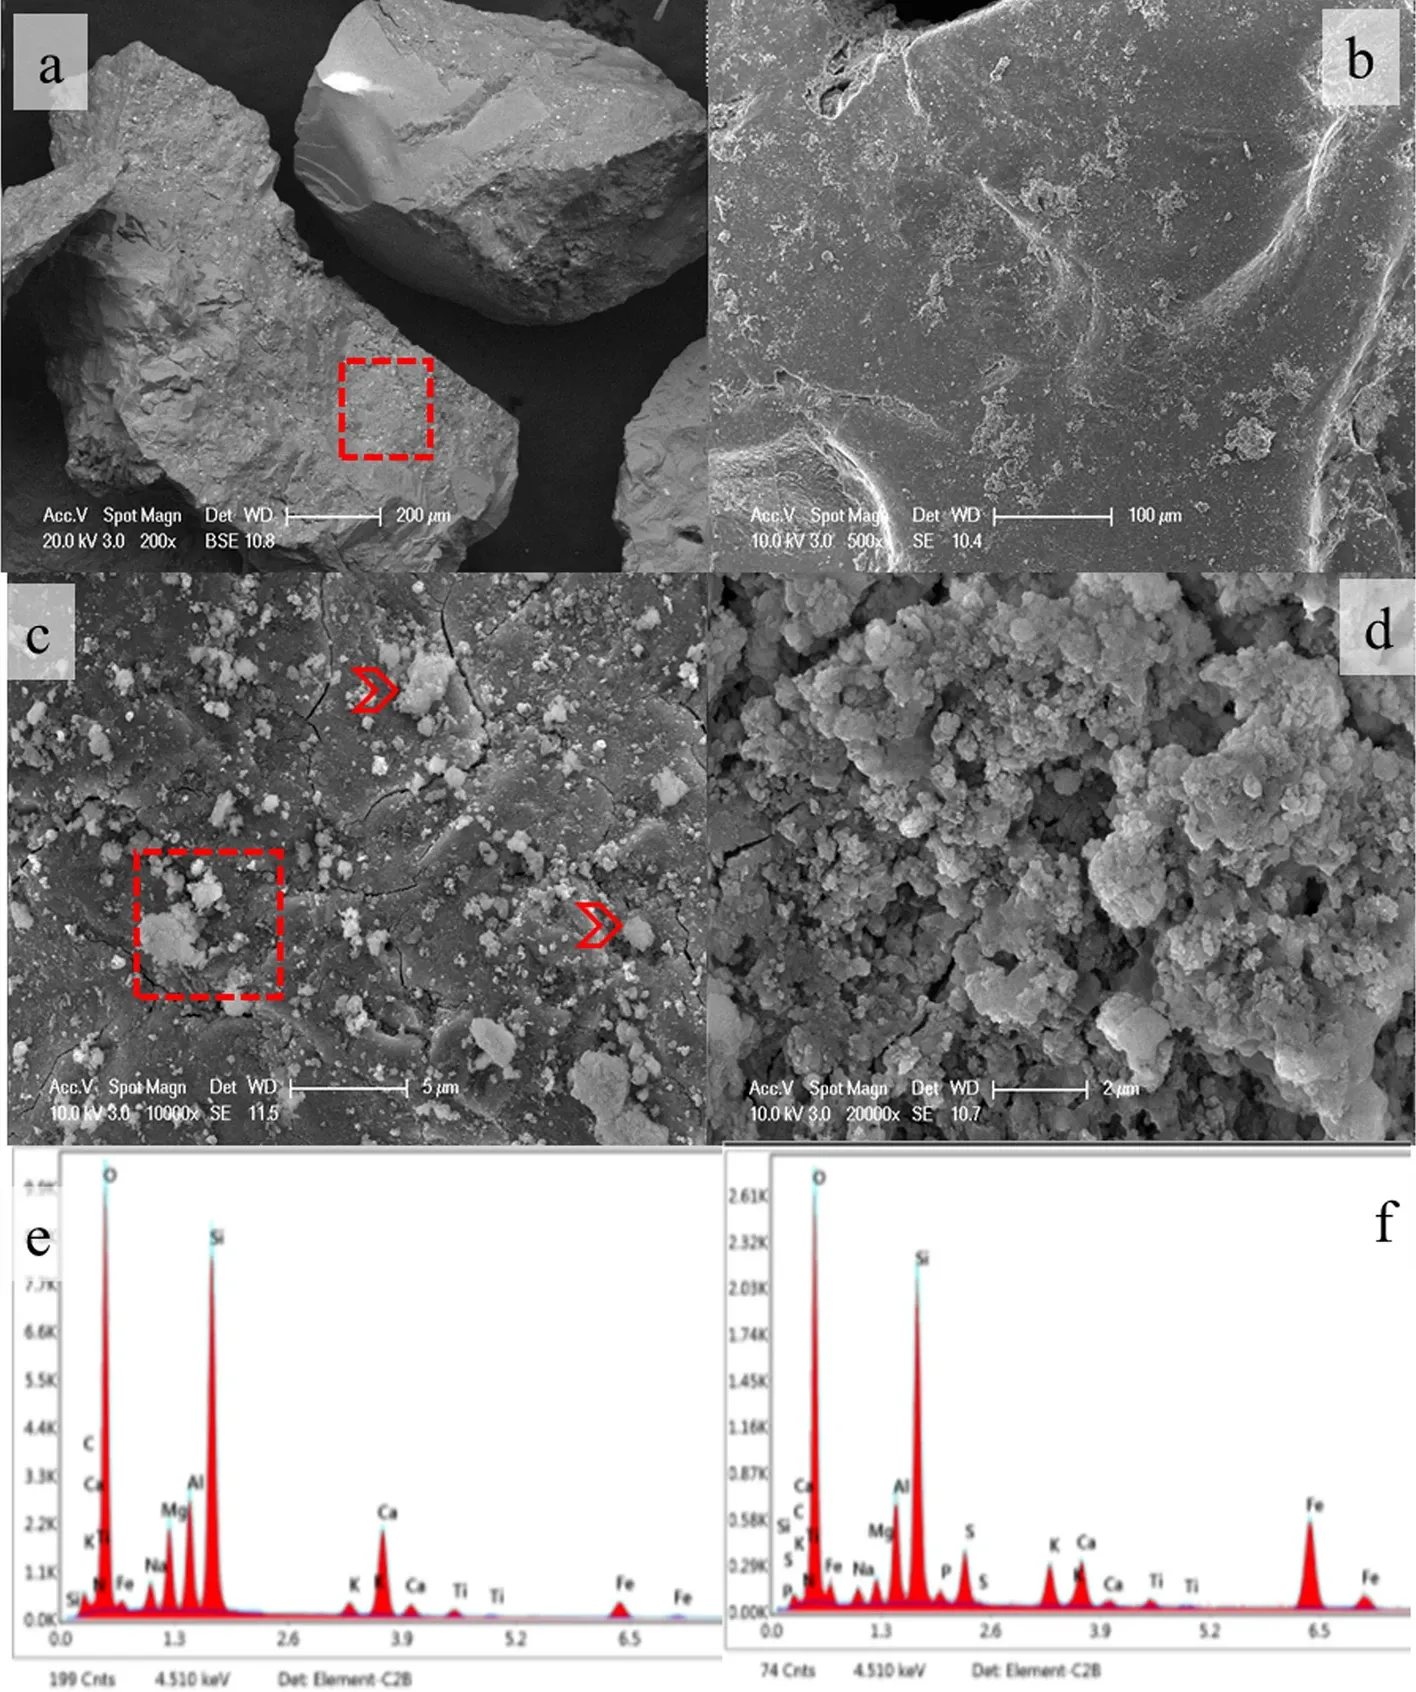 Fig 10: SEM photomicrographs of the abiotically reacted basaltic grains in acid sulfate solution. a Surface of the pre-reacted BS2 grains. b-c Surface of the post-reacted BS2-B grains. d A closer view of the red square in c. e EDS spectra of a. f EDS spectra of the post-reacted basalt grains in d